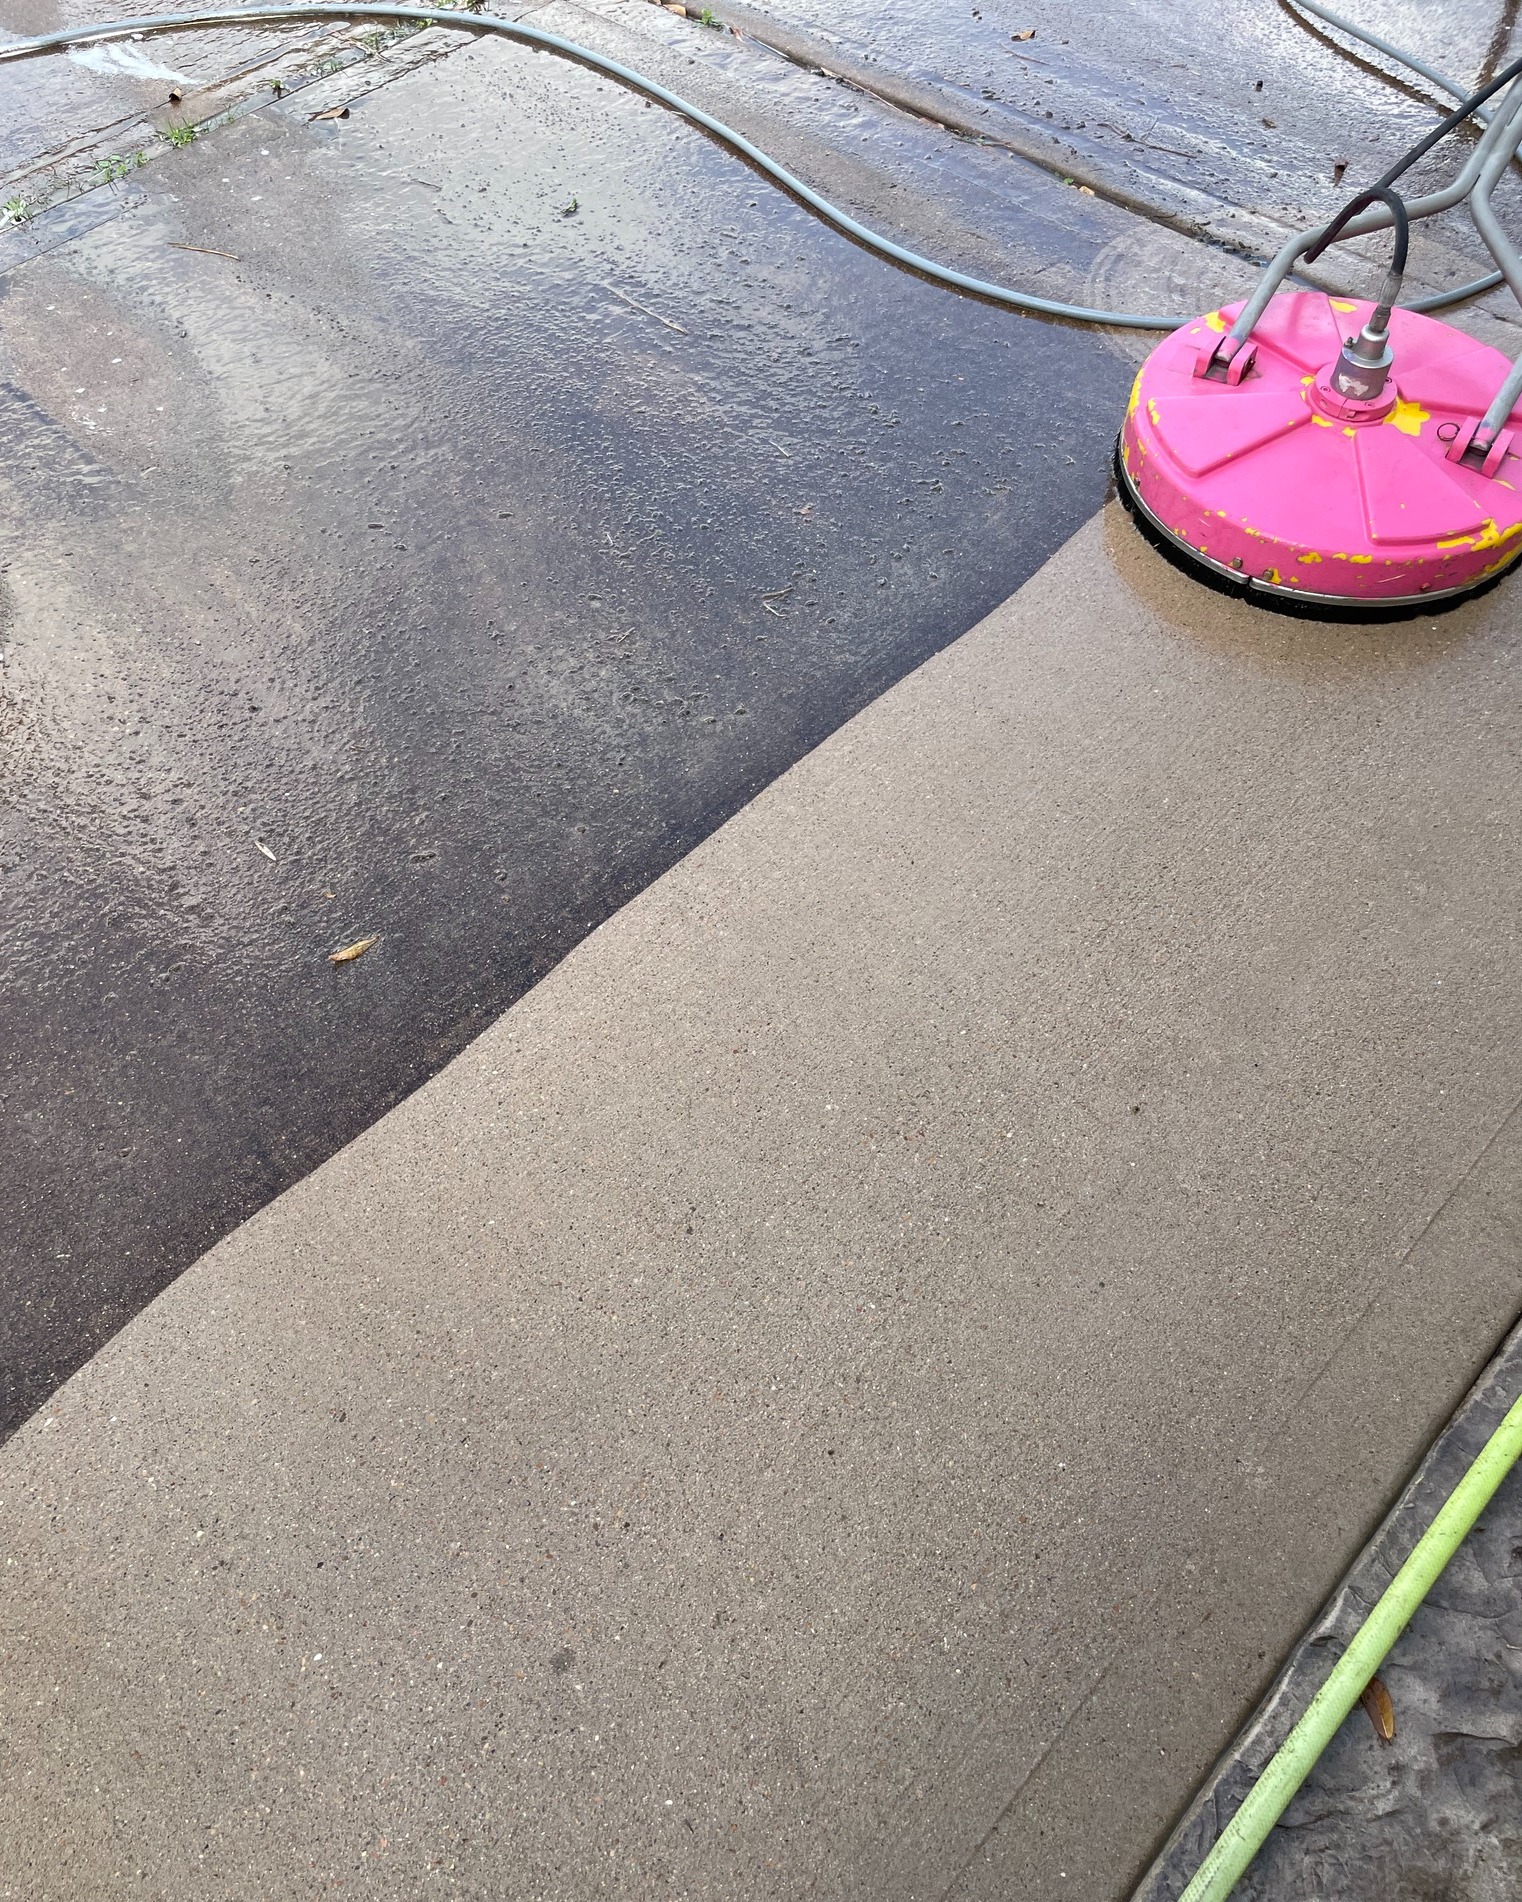 Space City Washing: Setting the Standard for Pressure Washing Excellence in Spring, TX